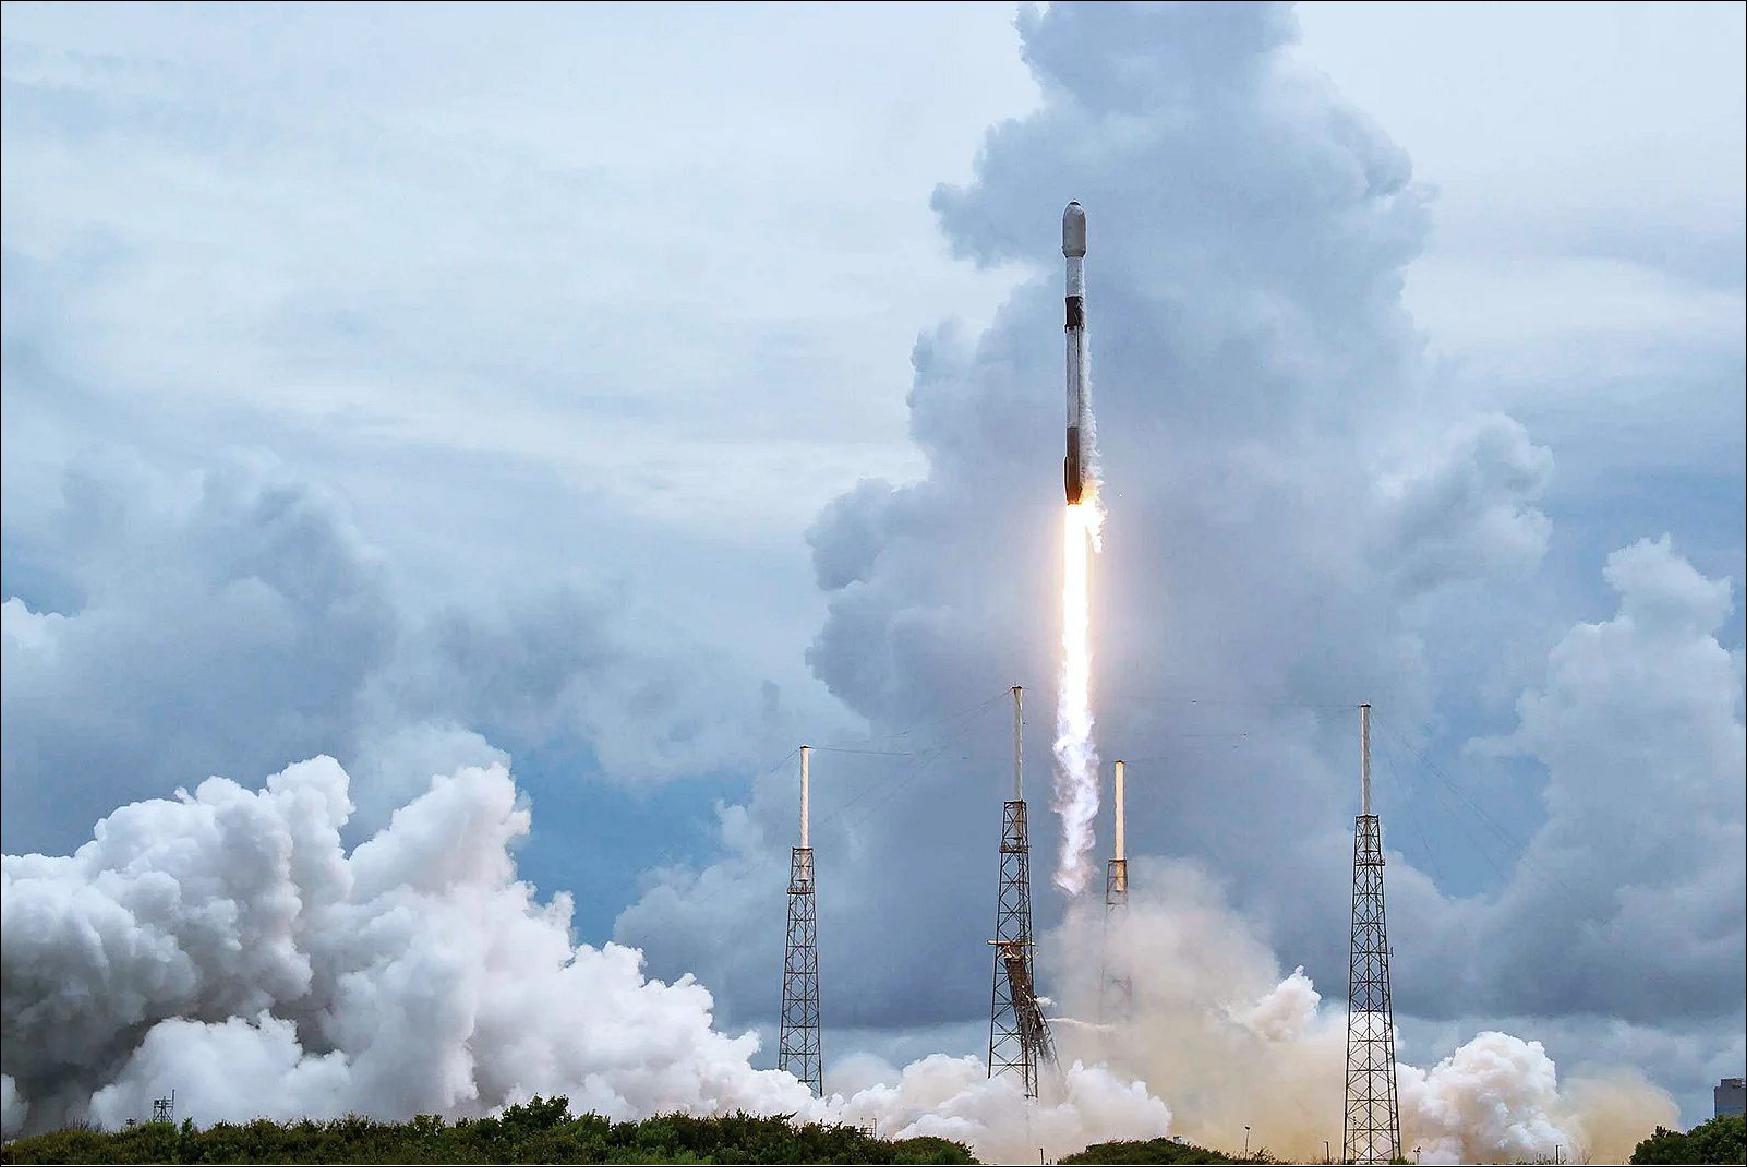 Figure 27: SpaceX Transporter-2 launch, 30 June 2021, carrying 4 ICEYE radar imaging satellites from Cape Canaveral Space Force Station, Florida. The deployment of the payload of 88 satellites started nearly 58 minutes after liftoff, once the upper stage performed a second burn of its engine to place it into a sun-synchronous orbit at an altitude of nearly 550 km (image credit: SpaceX via Exolaunch)